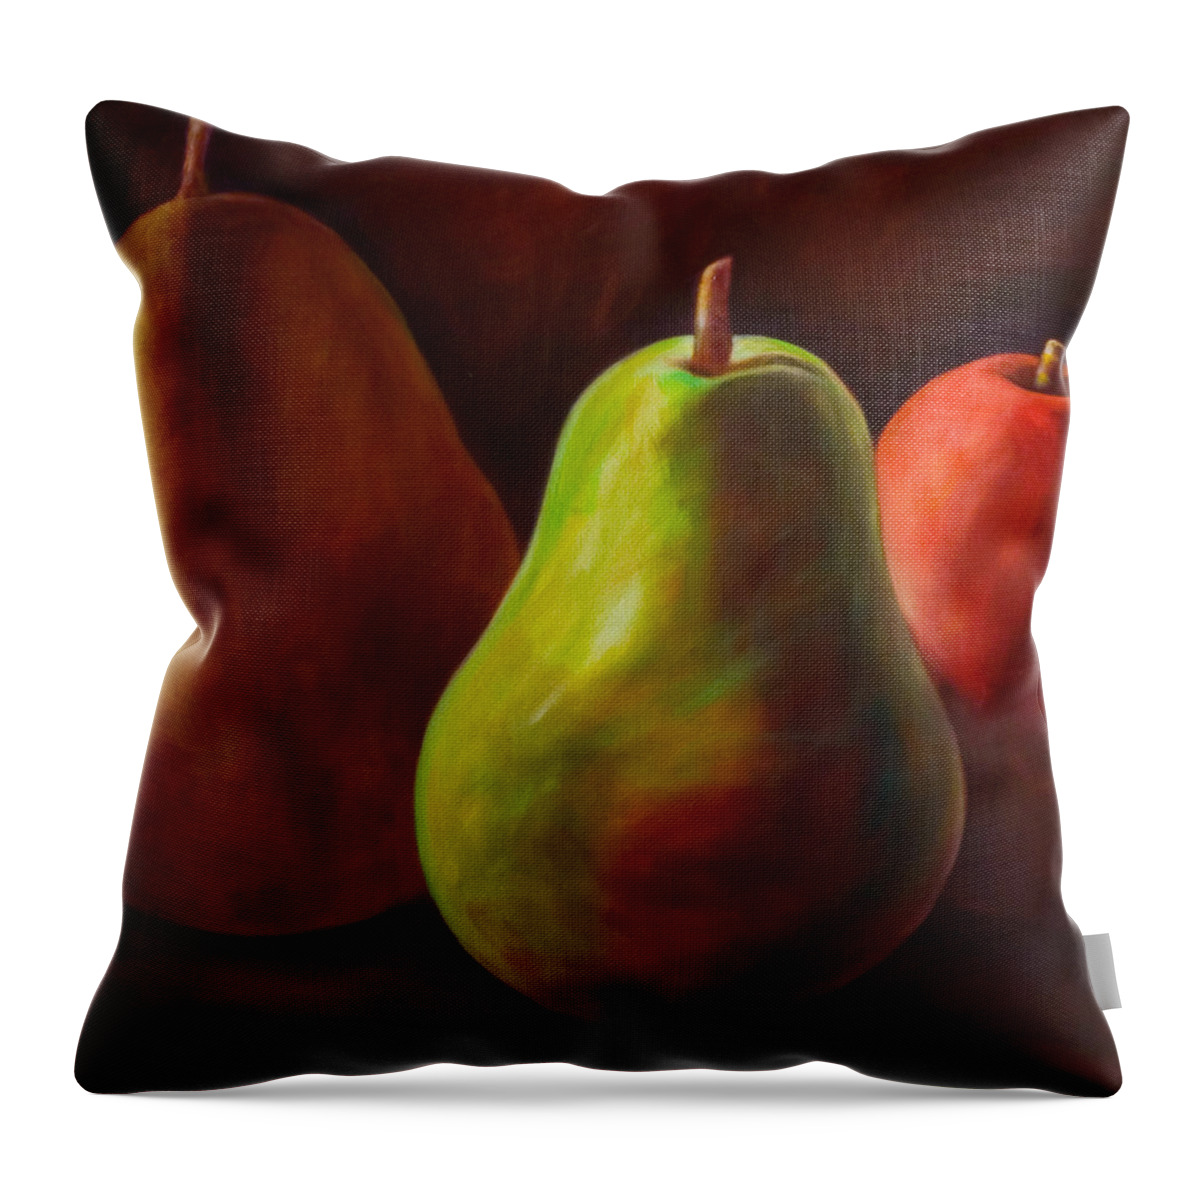 Fruit Throw Pillow featuring the painting Tri Pear by Shannon Grissom